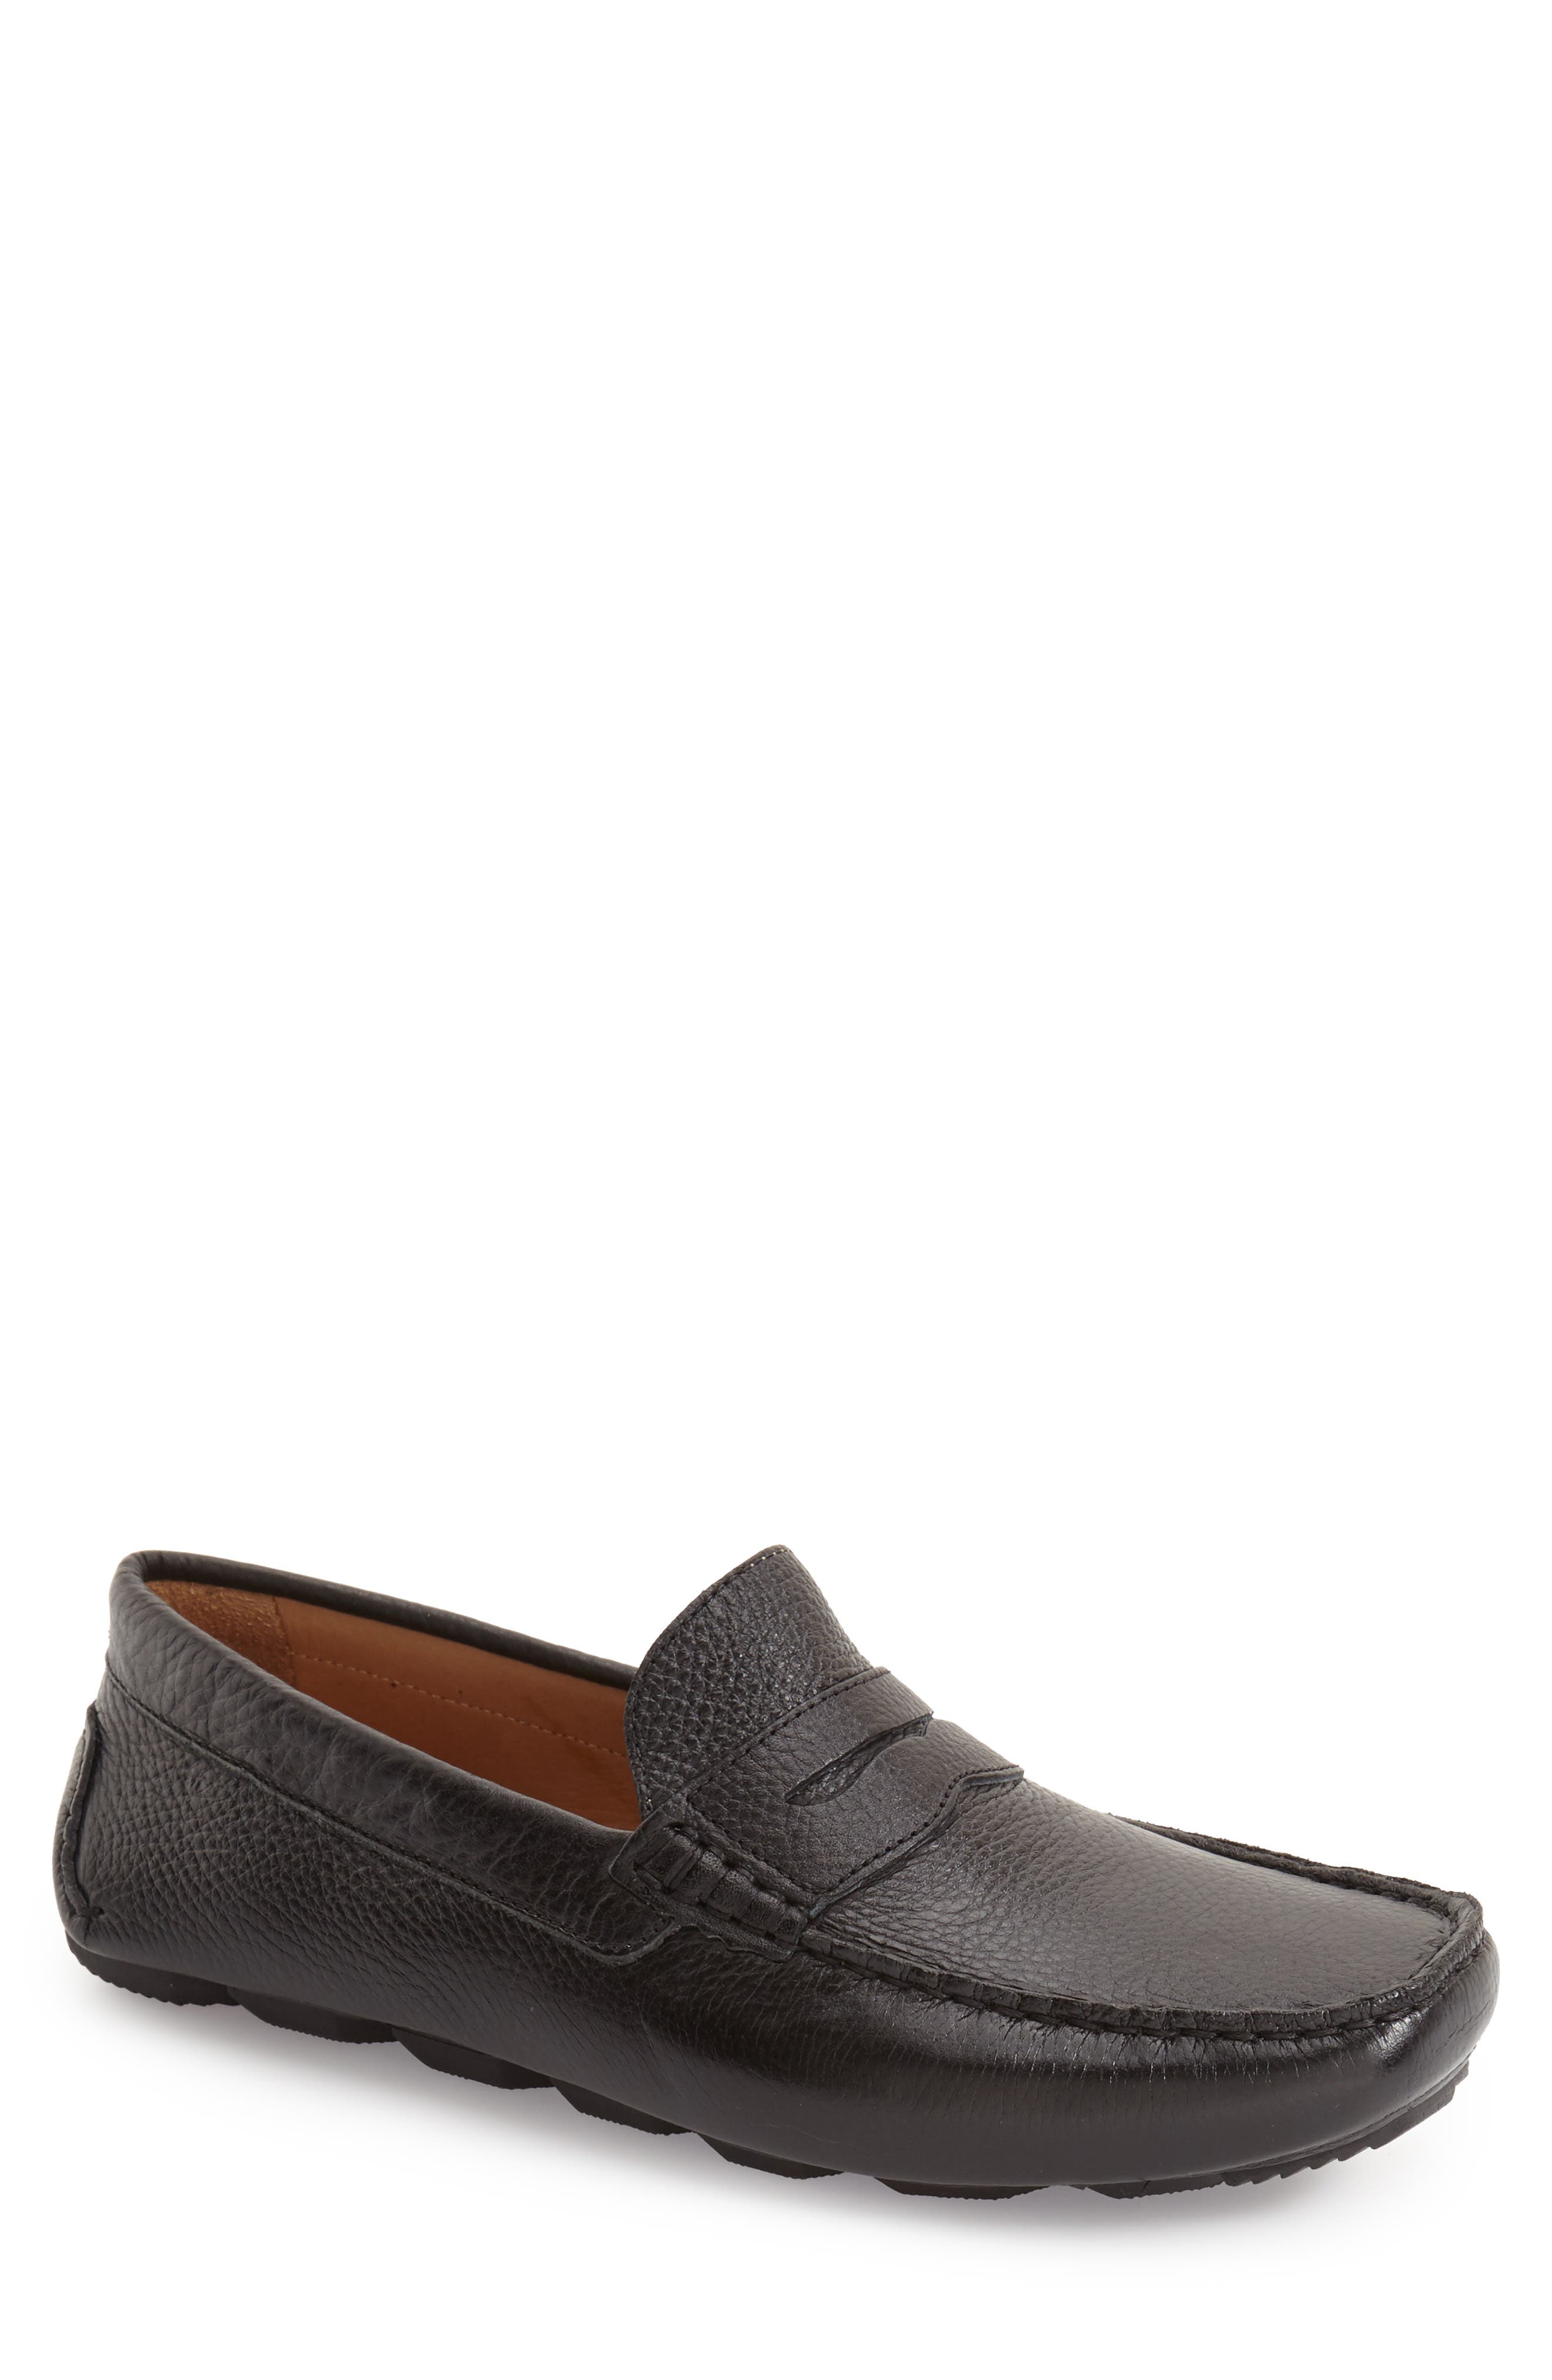 mens penny loafers canada